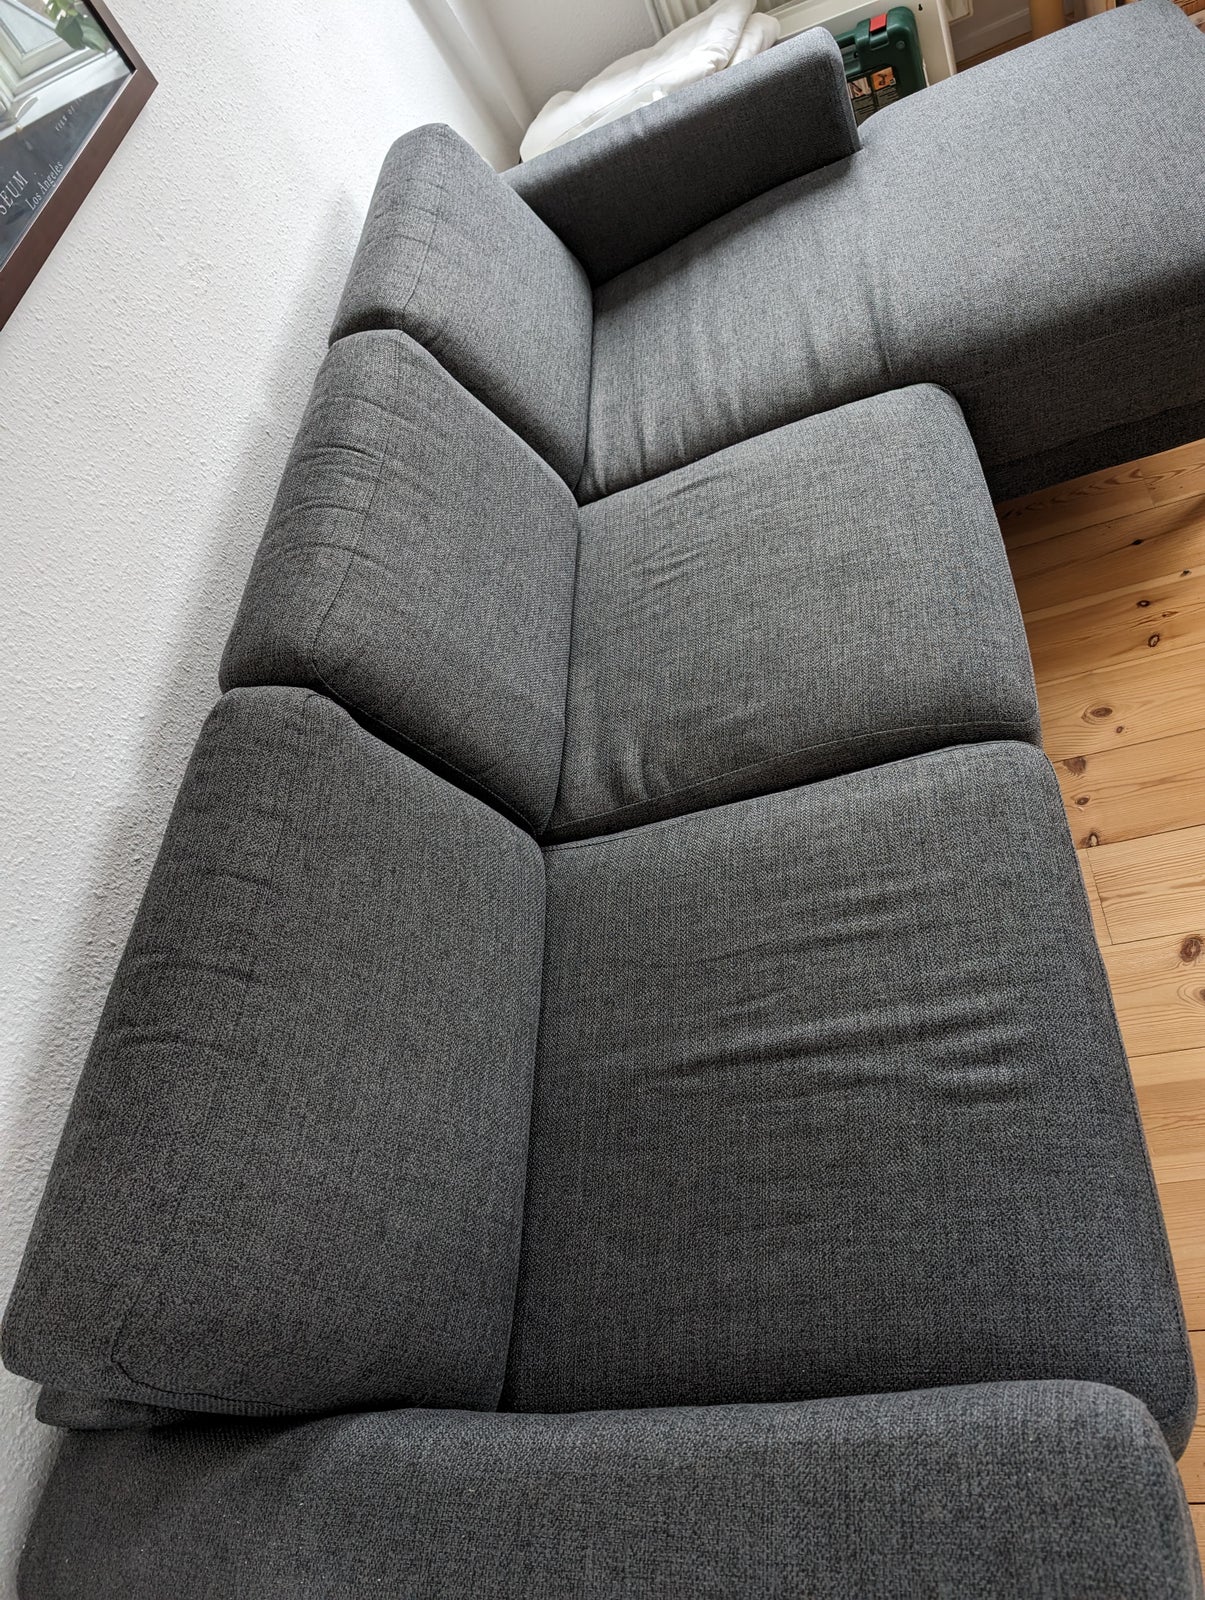 Sofa, andet materiale, 3 pers.